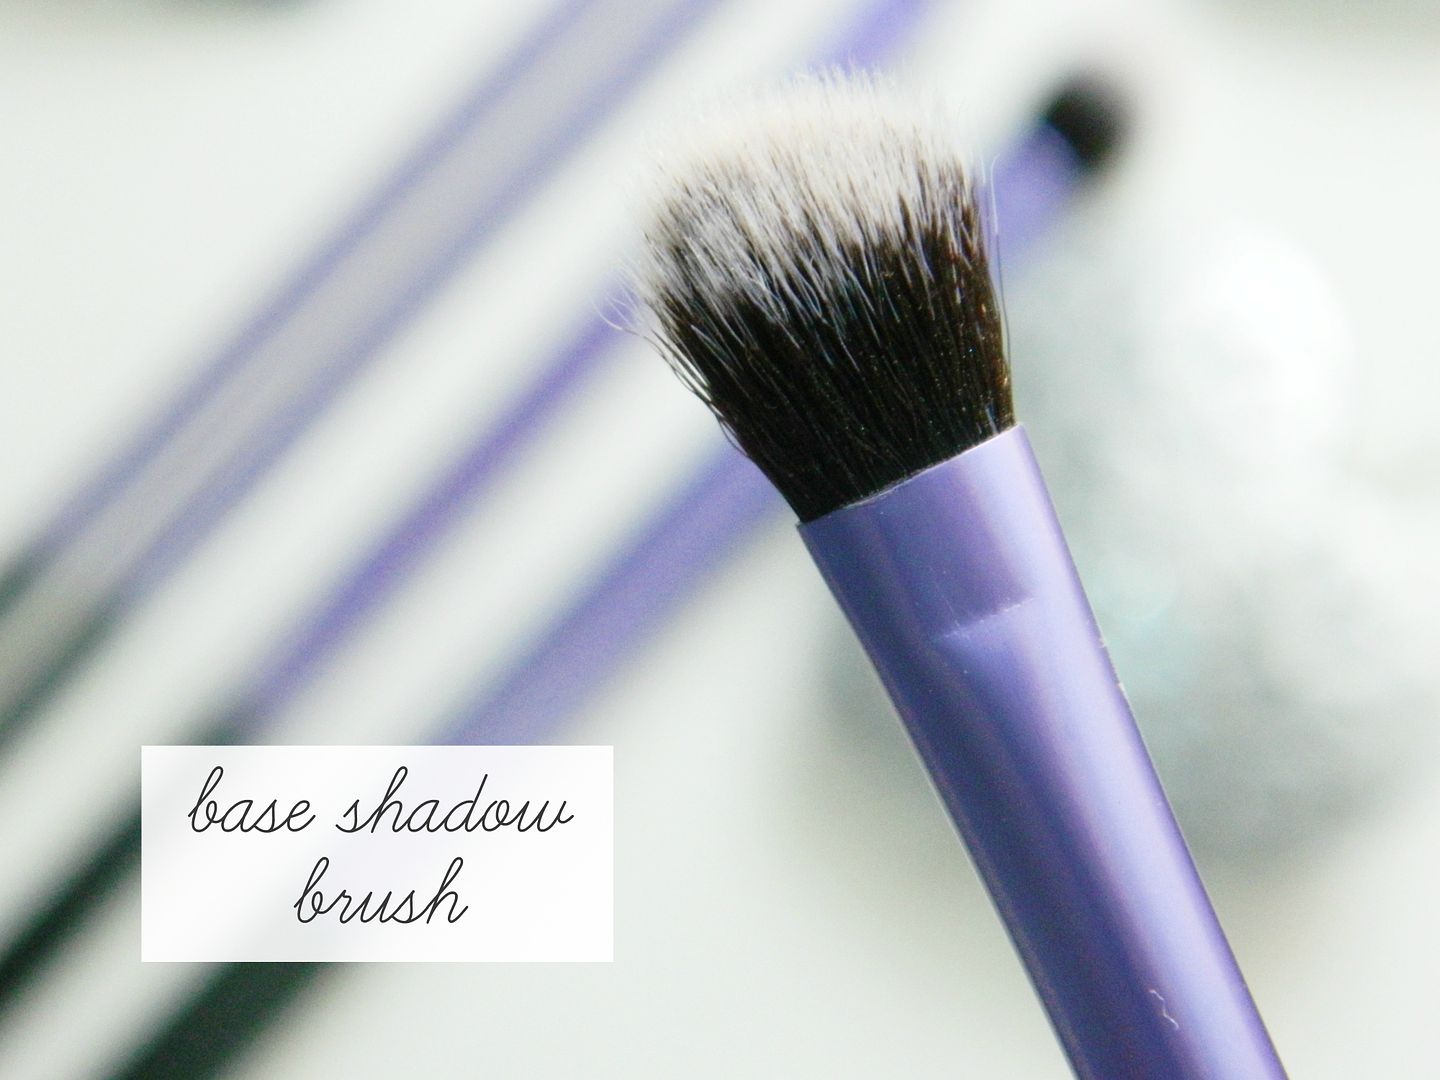 Real Techniques Starter Set Eye Makeup Brushes Base Shadow Brush Review Belle-amie UK Beauty Fashion Lifestyle Blog